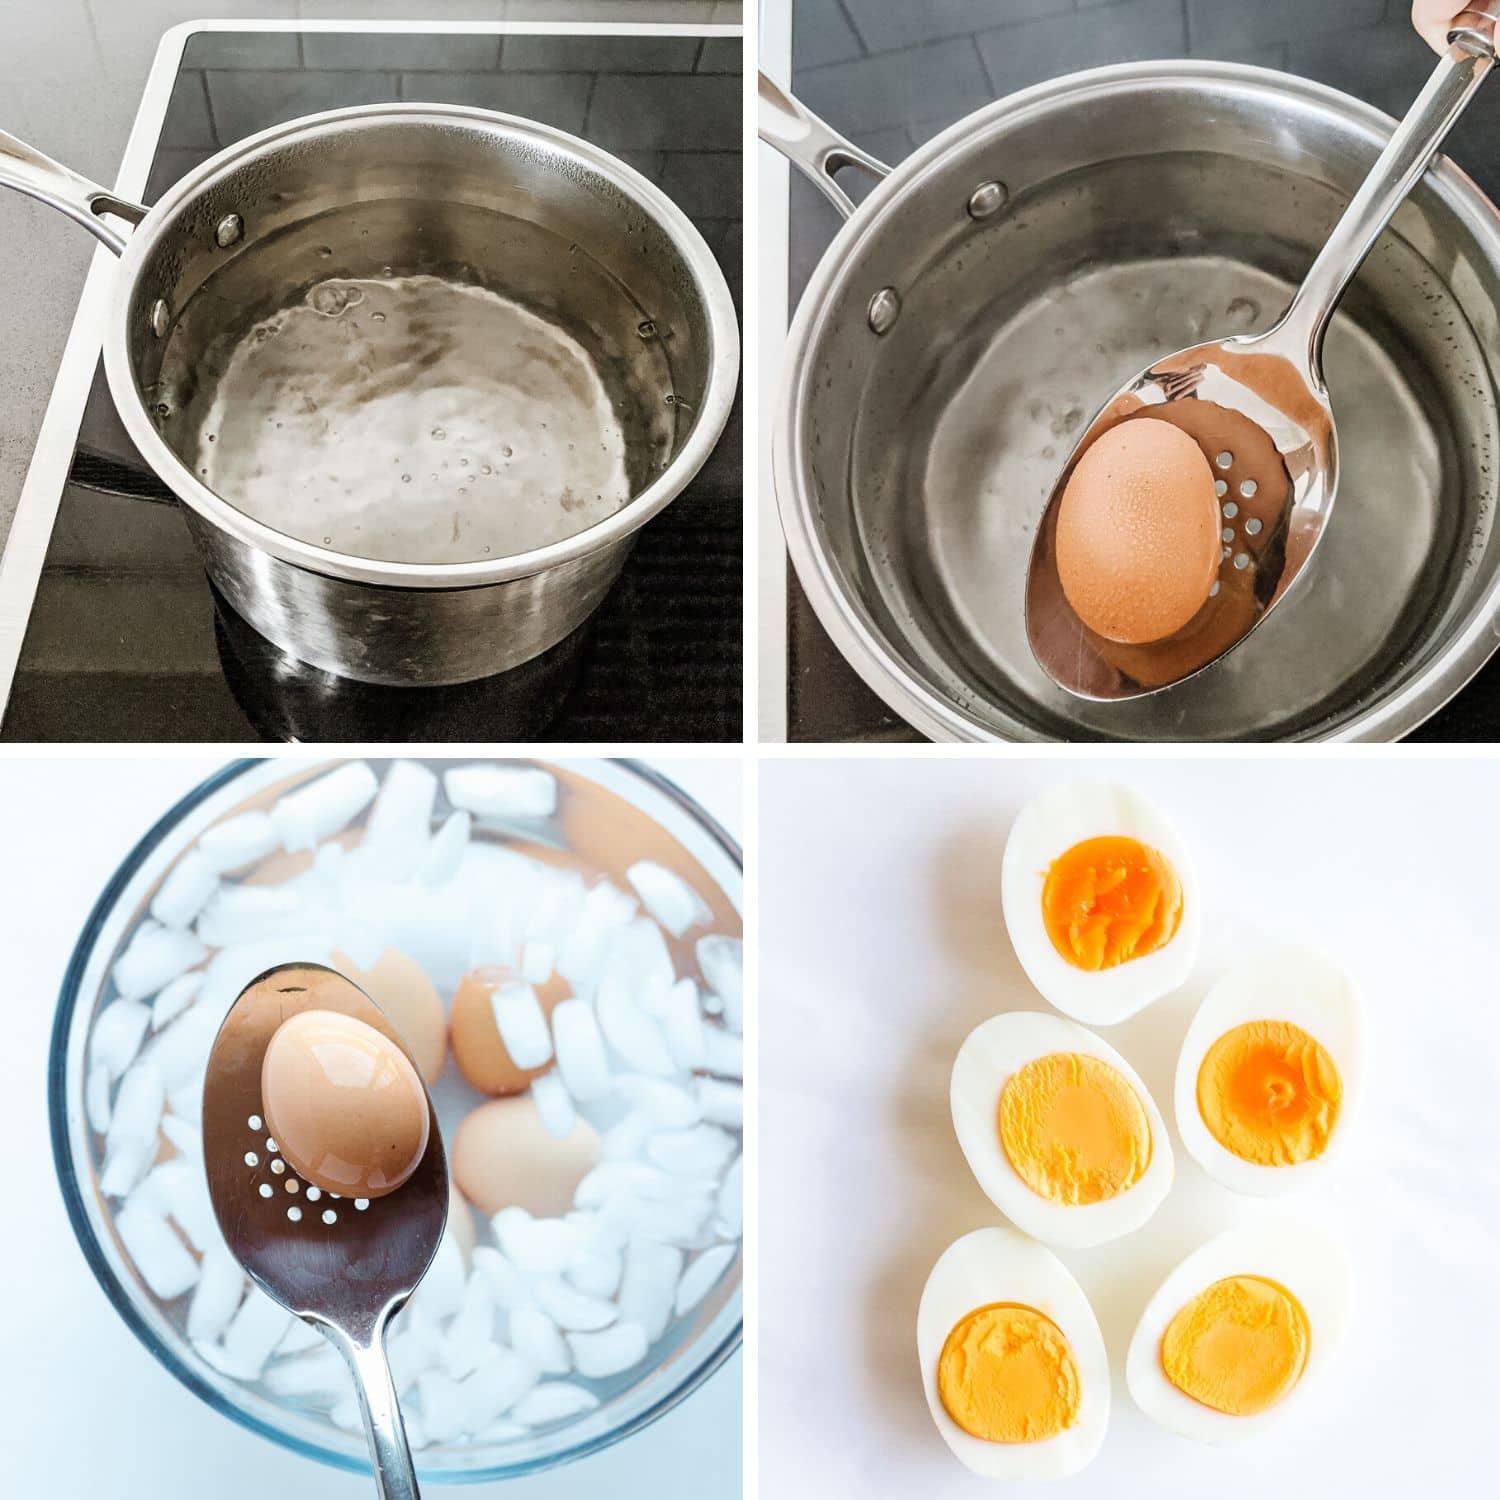 Collage of photos showing how to make hard boiled eggs using the stovetop method.